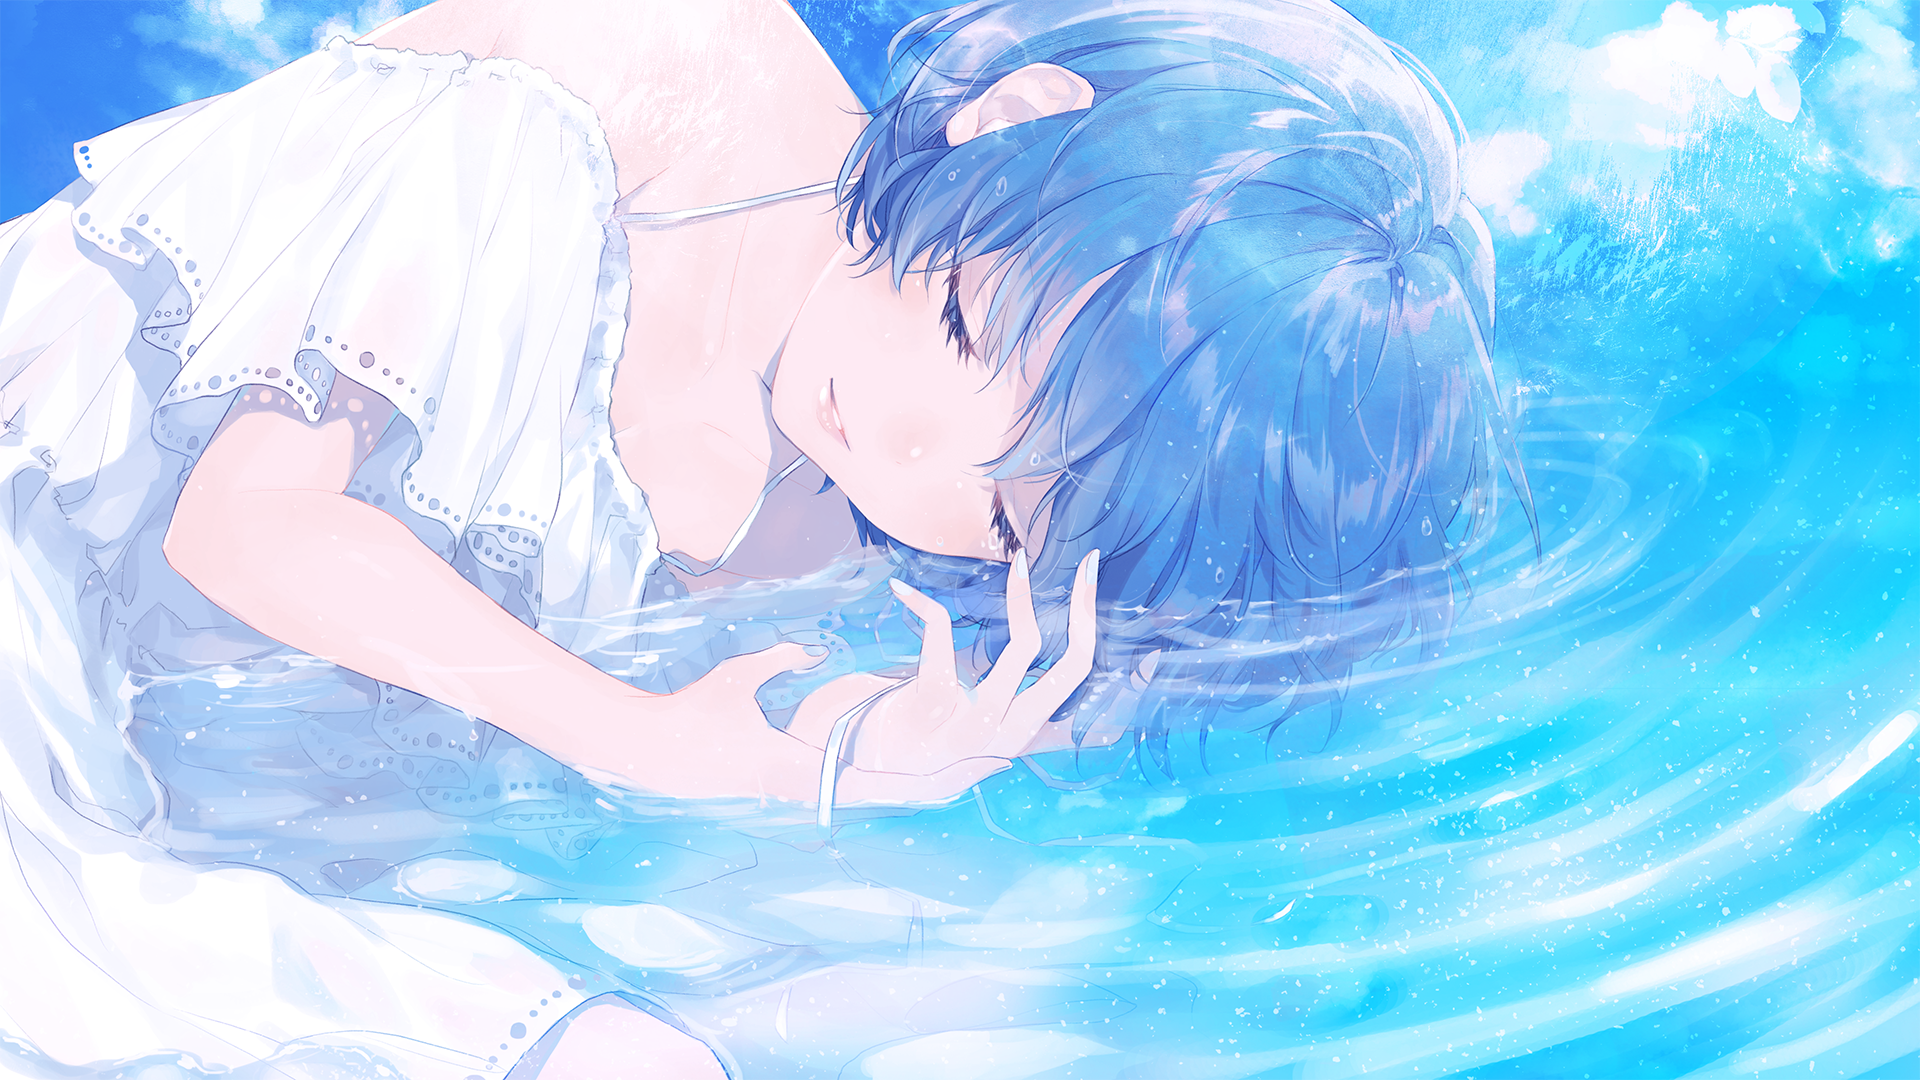 Anime Anime Girls Blue Hair Short Hair In Water Closed Eyes Clouds Blue Nails Ribbons Waves Sudach K 1920x1080